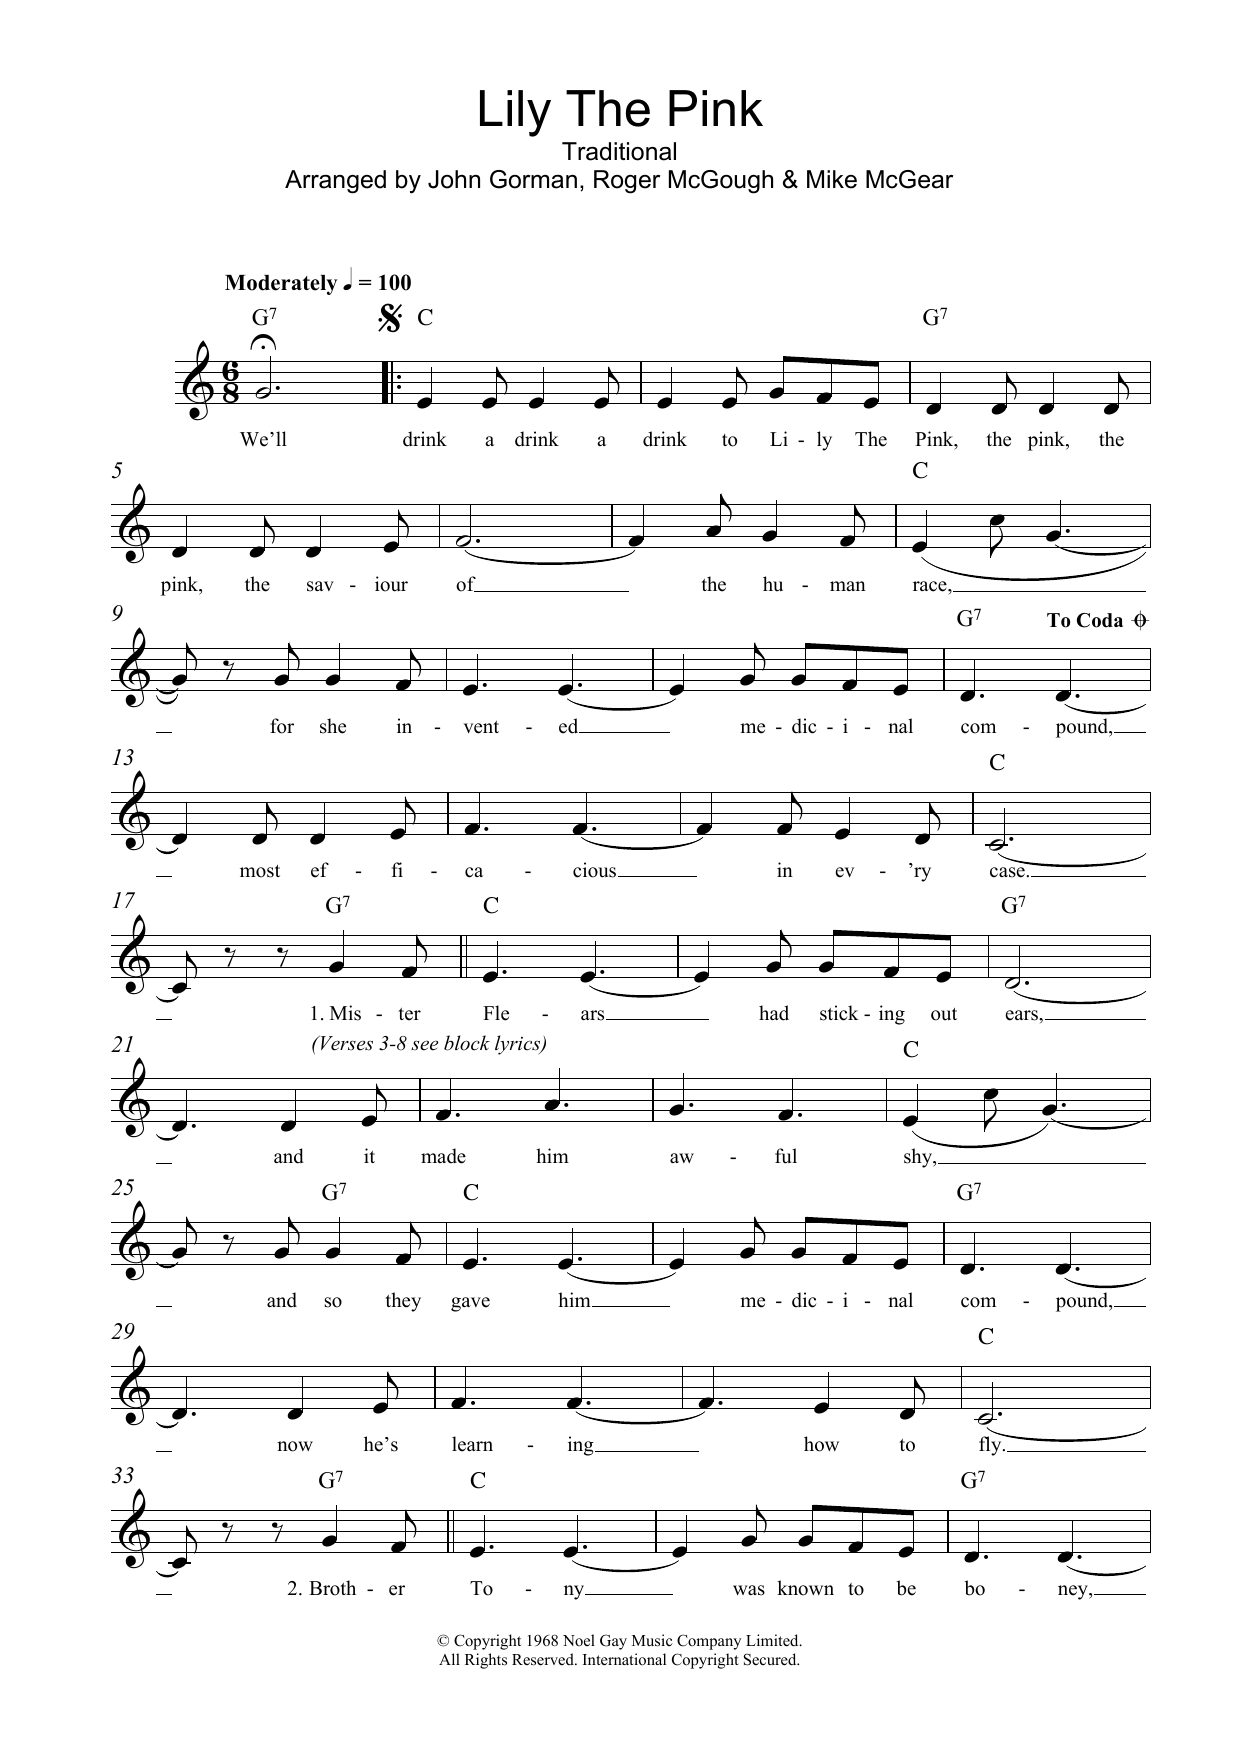 Download Traditional Lily The Pink Sheet Music